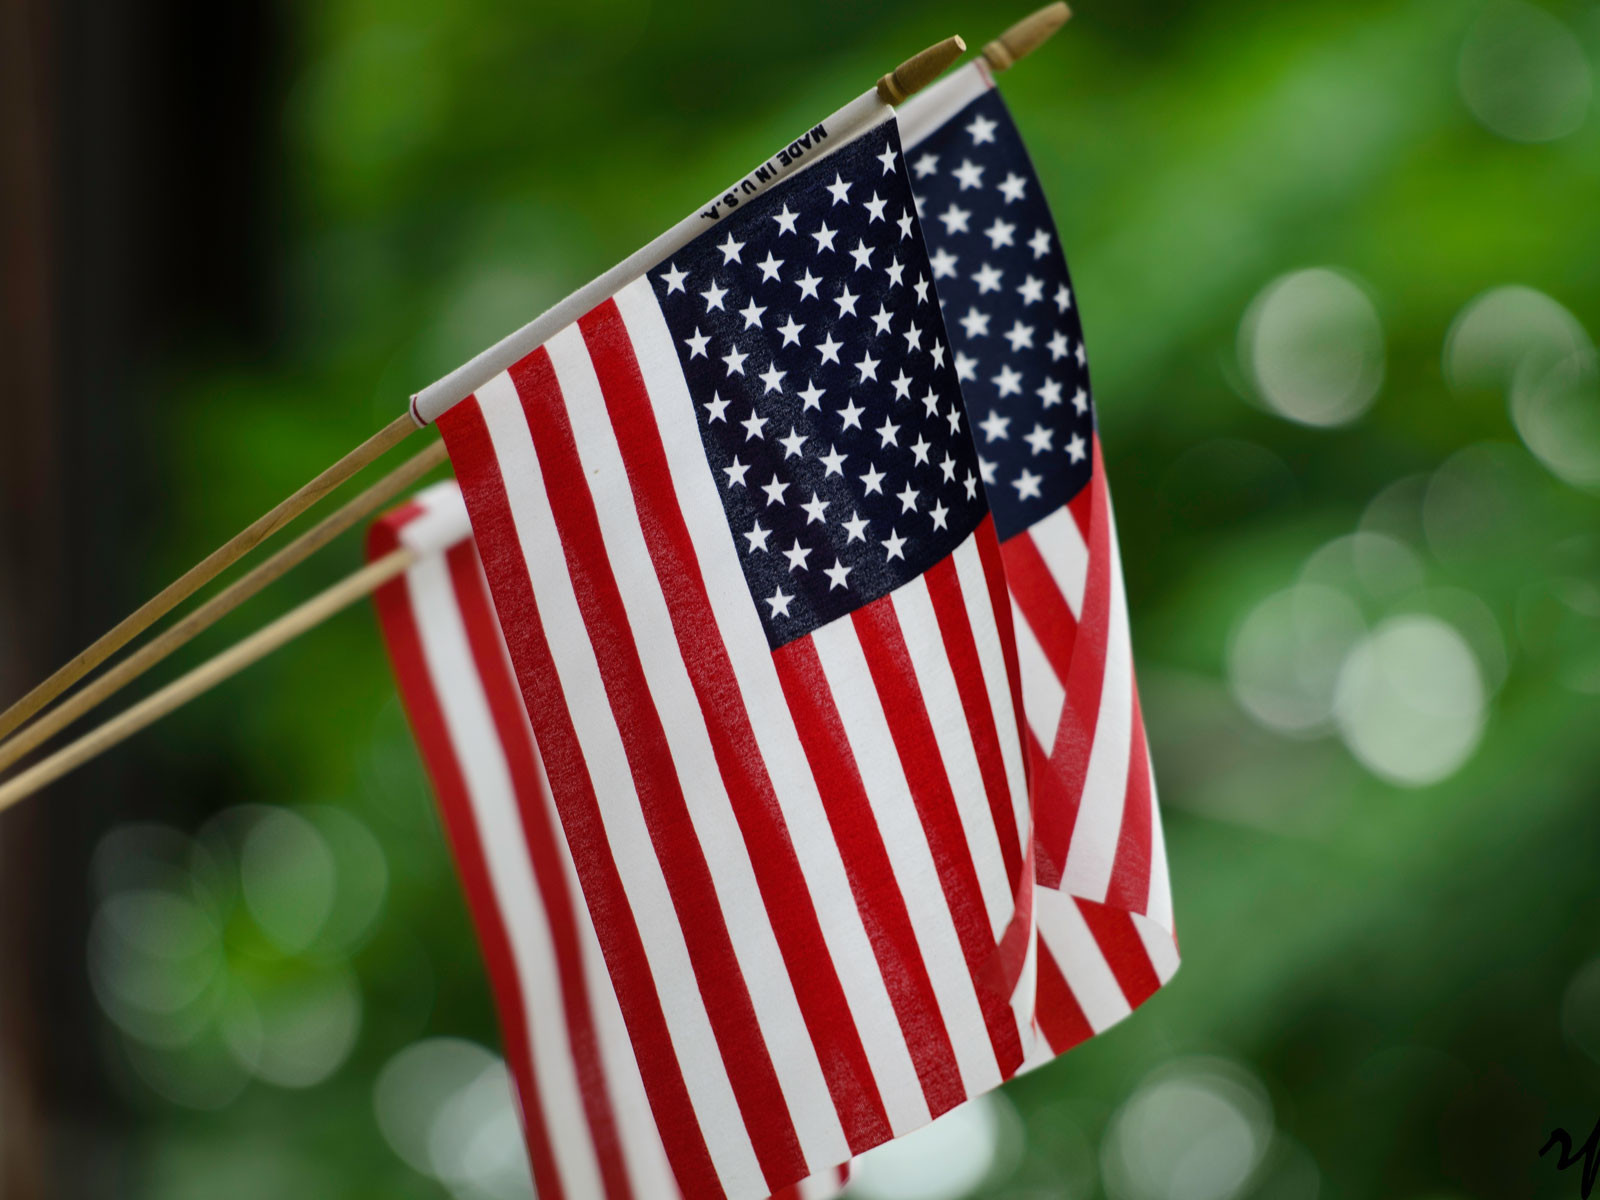 Free Food Memorial Day Military
 Memorial Day 2019 Deals and Discounts for Veterans and